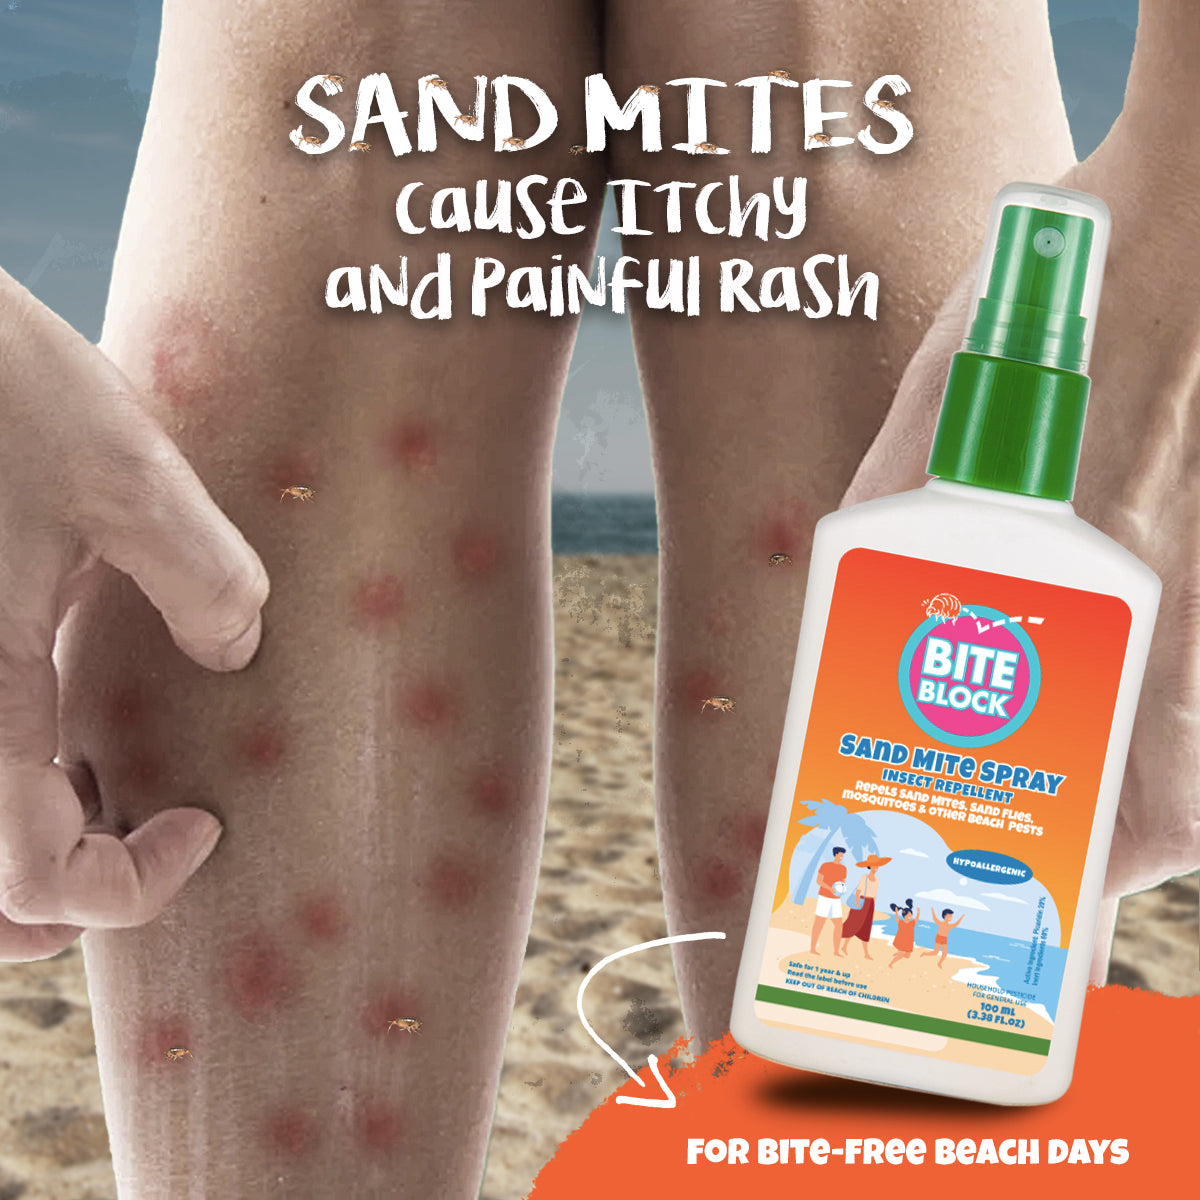 Bites from sand mites can cause itchy and painful rash, fever, and sand mite-borne diseases  Protect yourself from these painful bites and have a bite-free beach day!